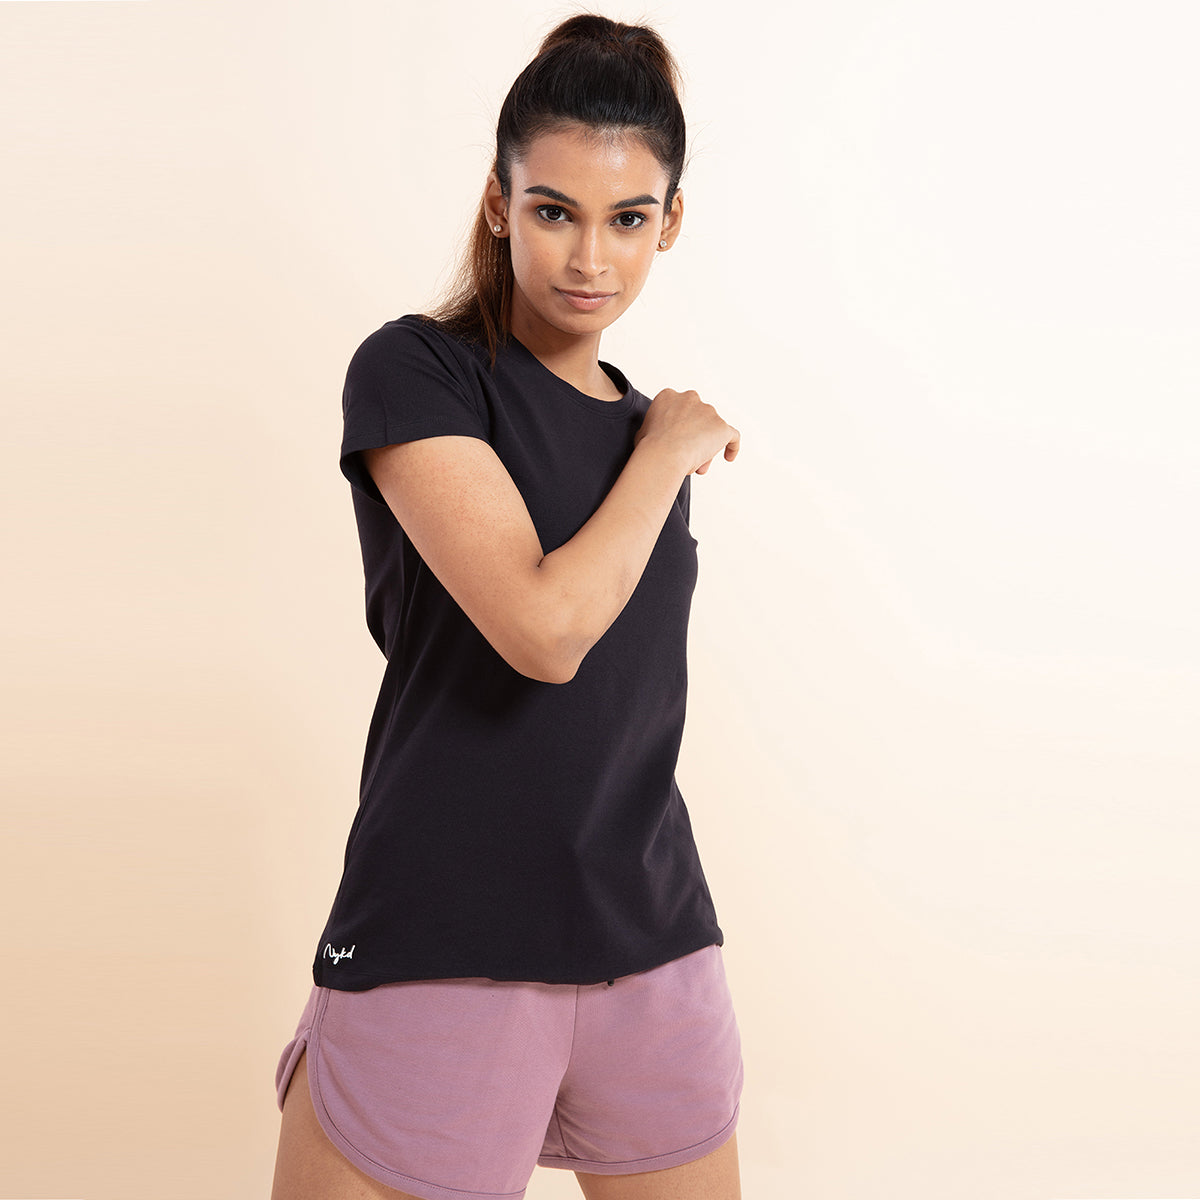 Essential Stretch Cotton Tee In Relaxed Fit , Nykd All Day-NYLE216 - Jet Black